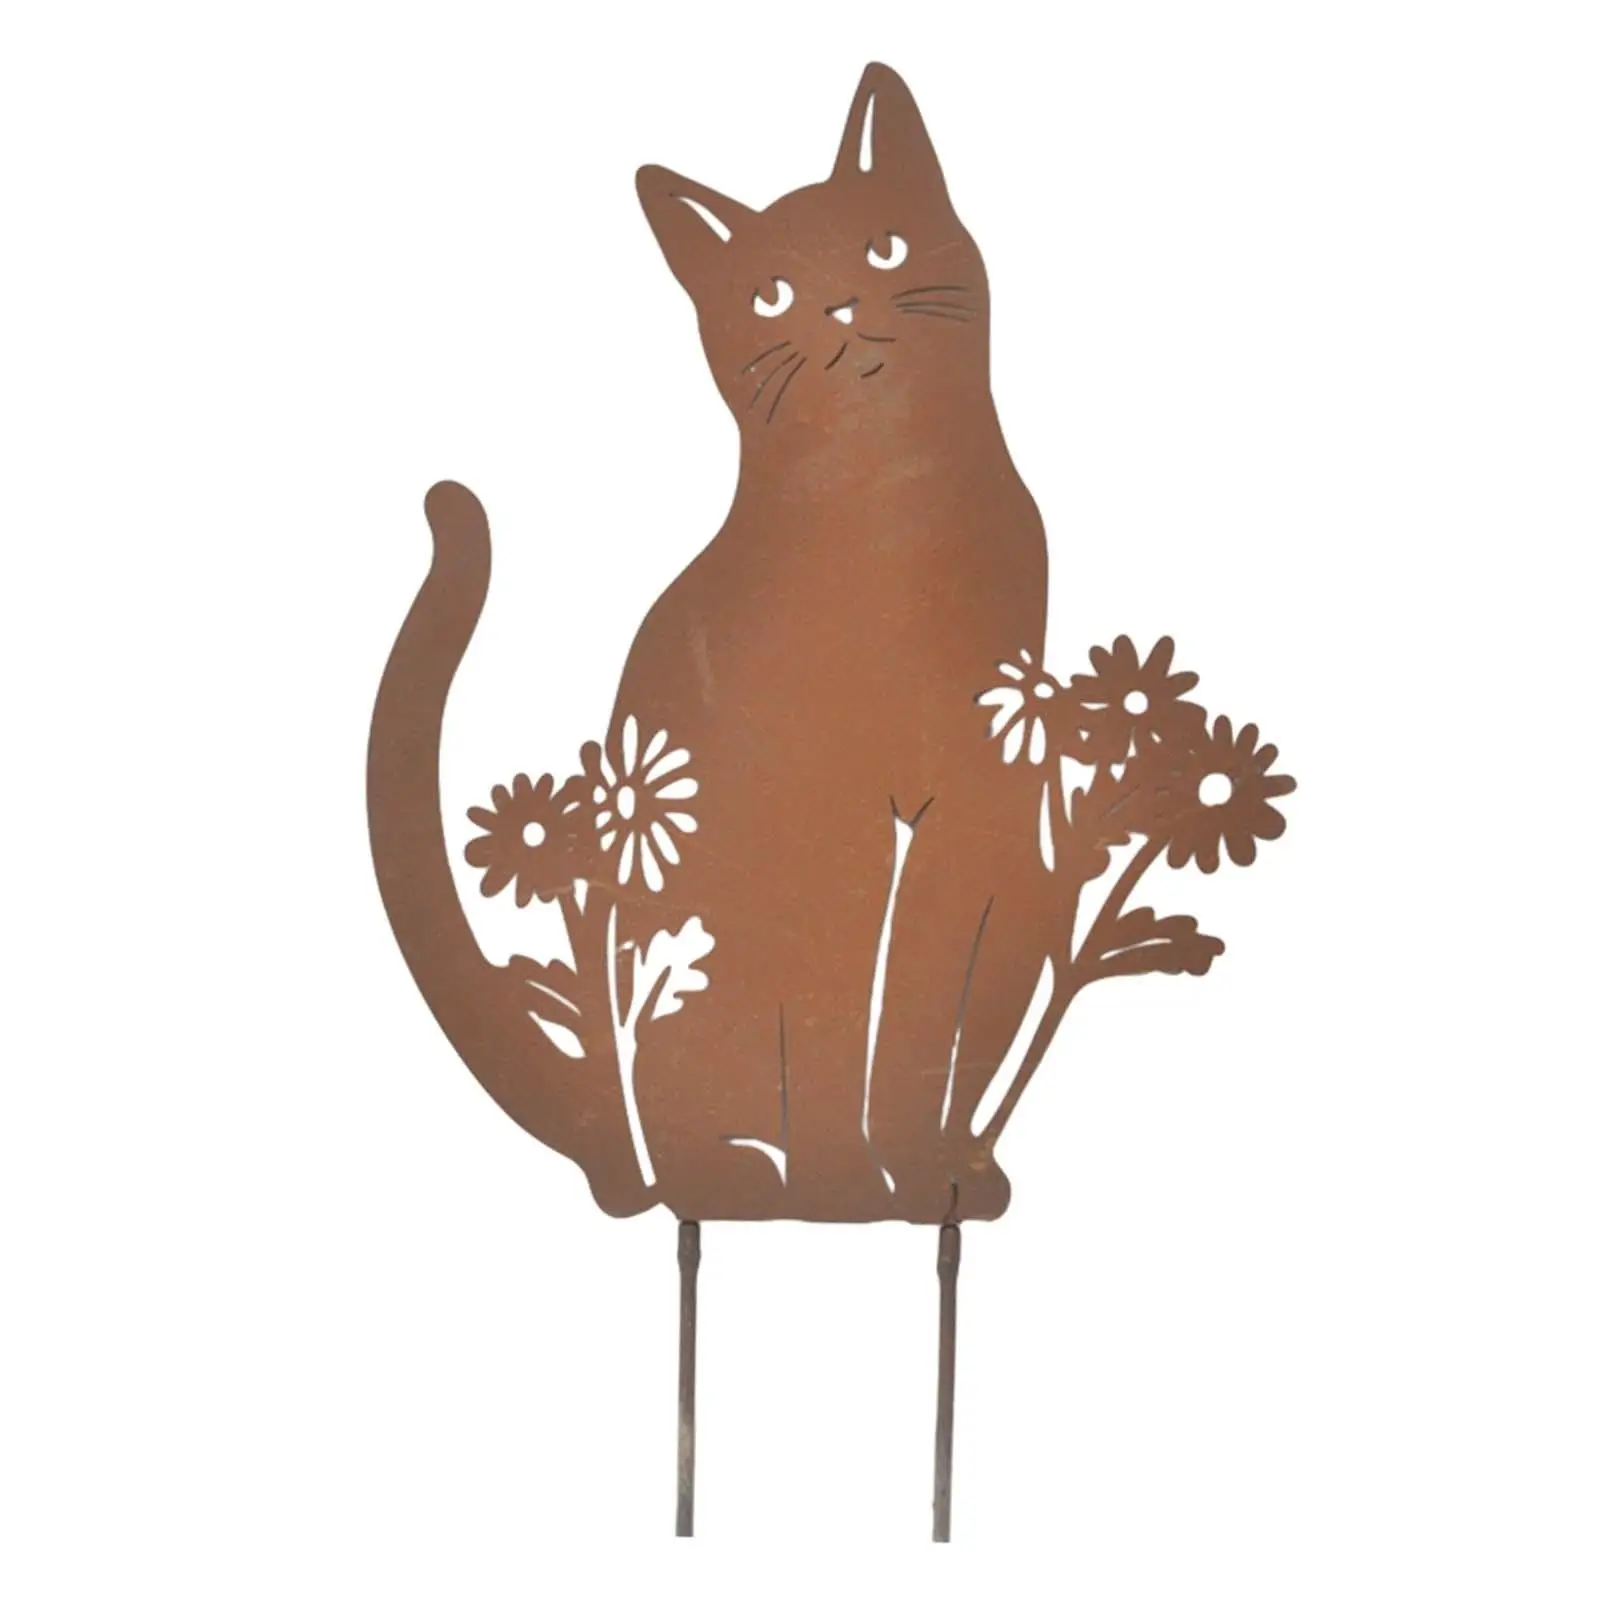 Metal Cat Garden Decor Wall Decoration Decorative Garden Stake Cat Yard Decor for Cat Lovers for Outdoor Lawn Home Decor Outside